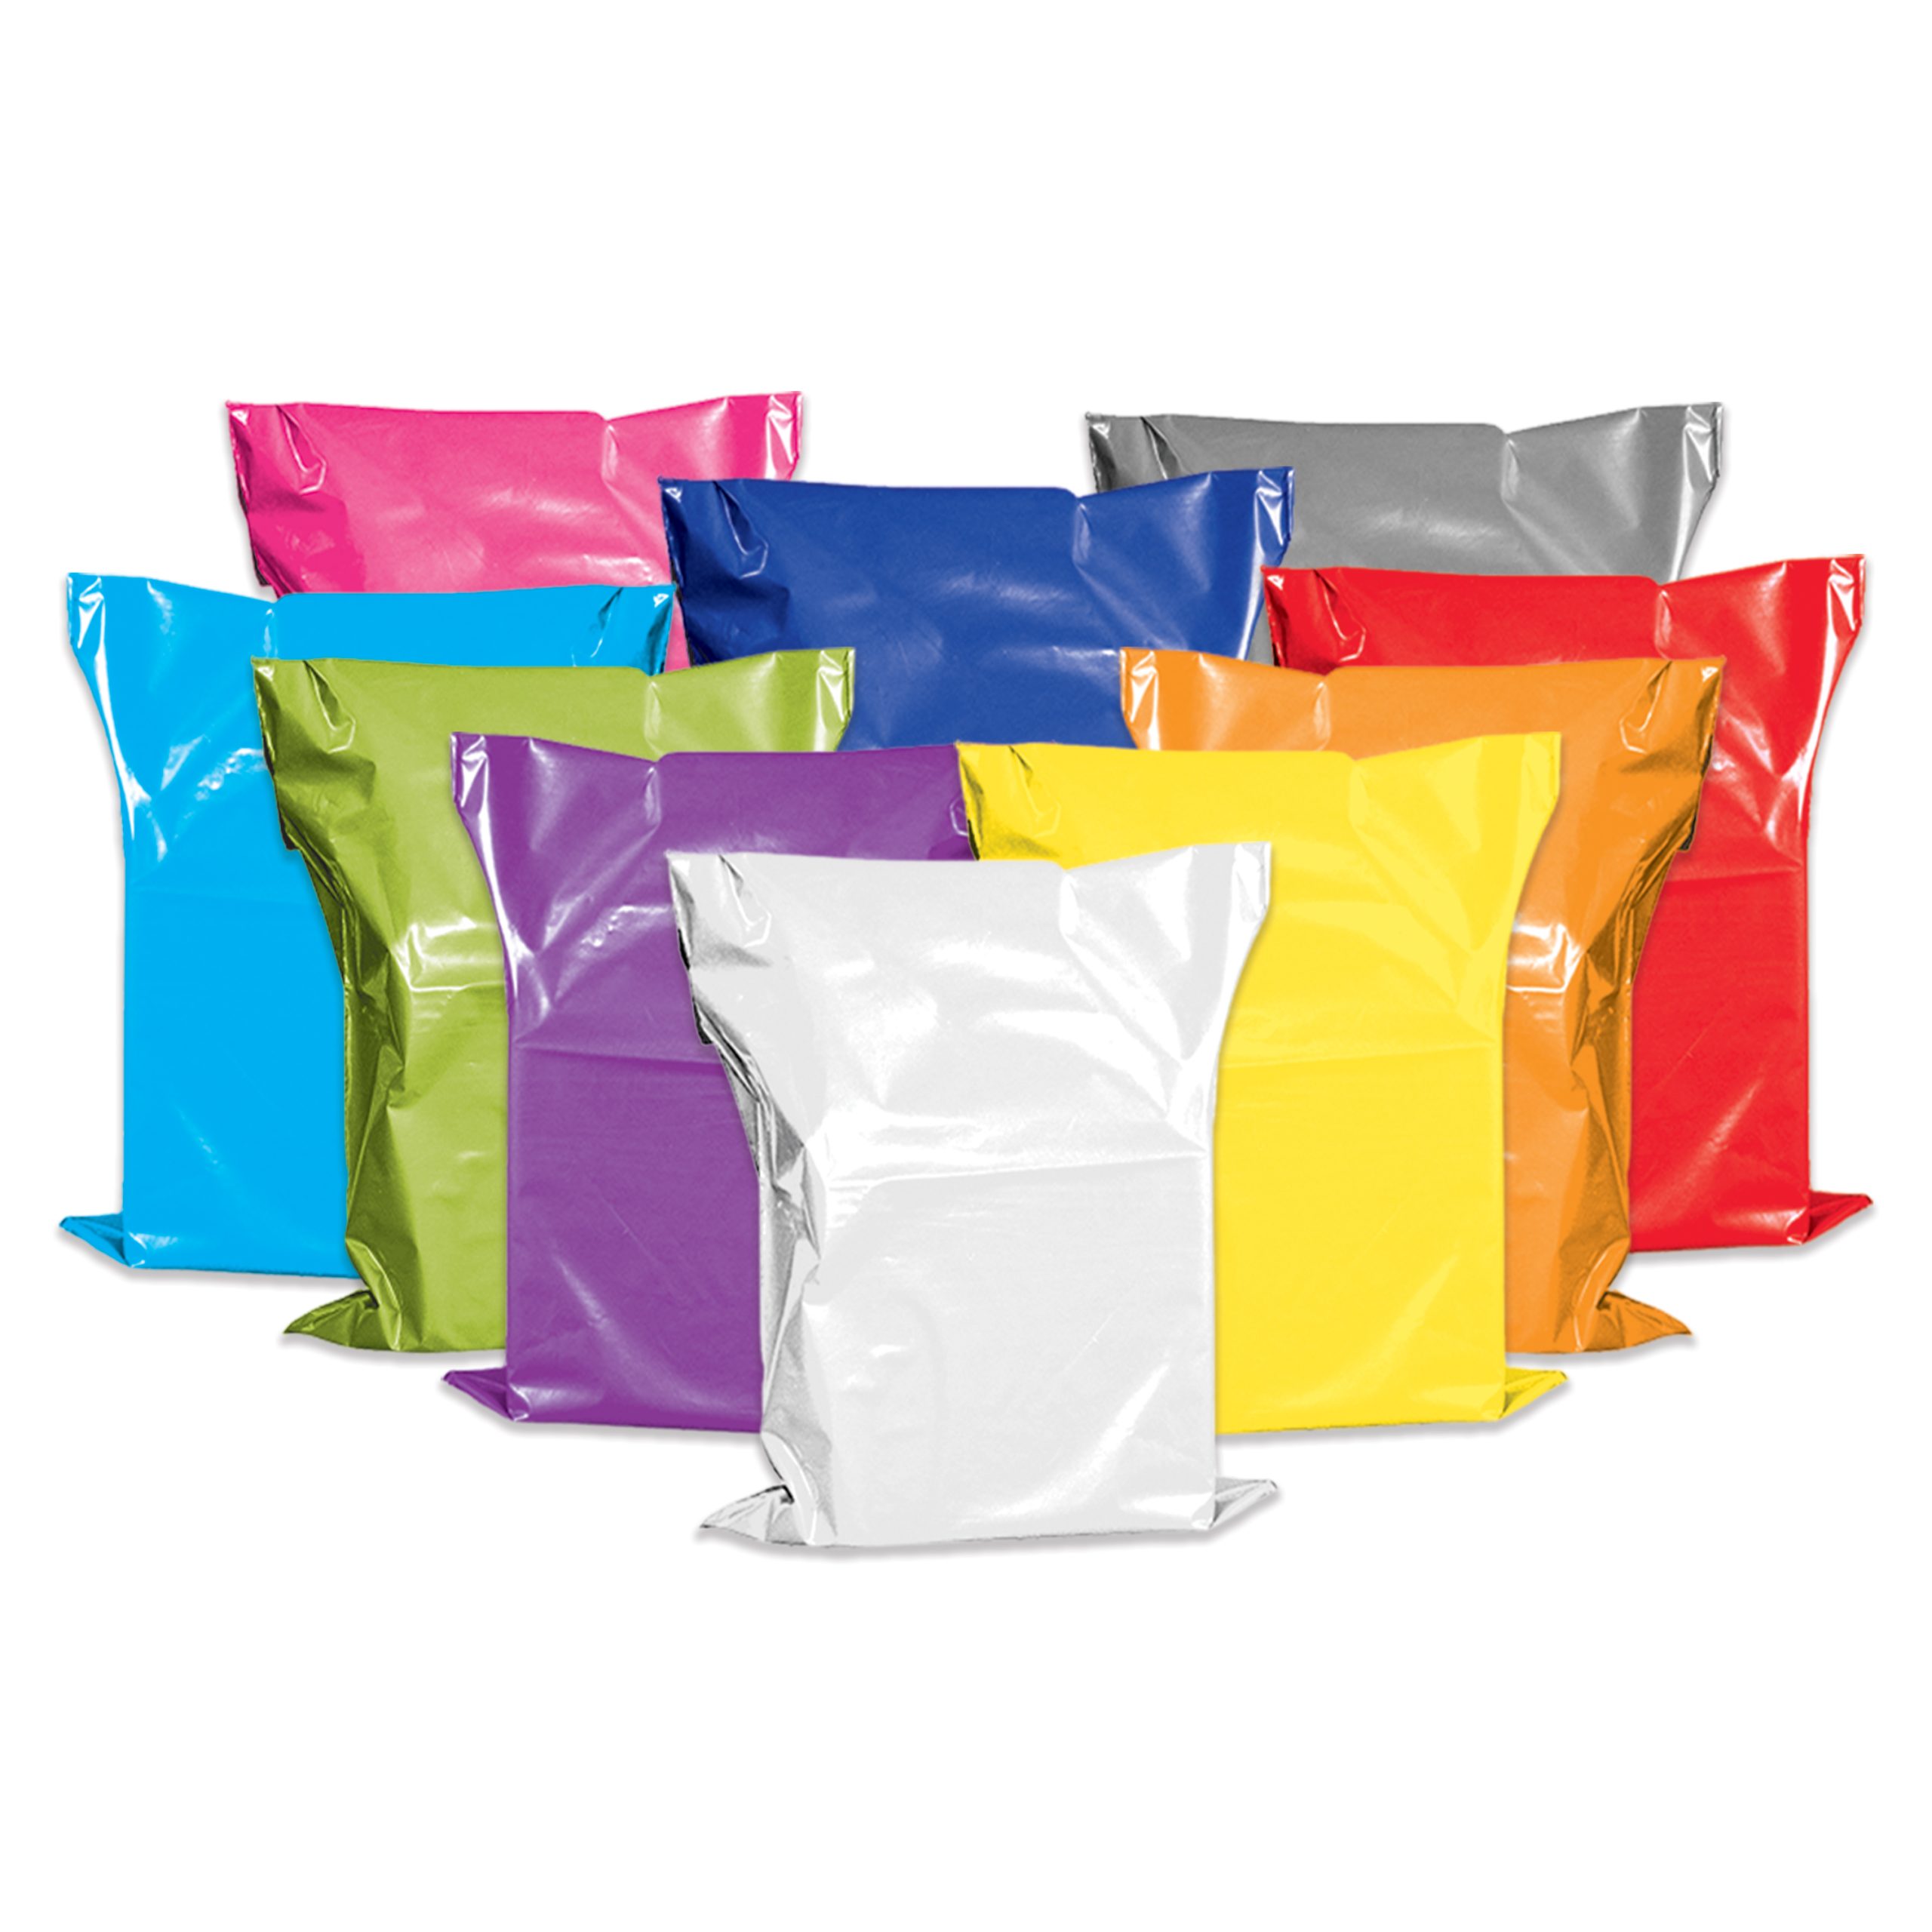 Mailing Bags Category Images